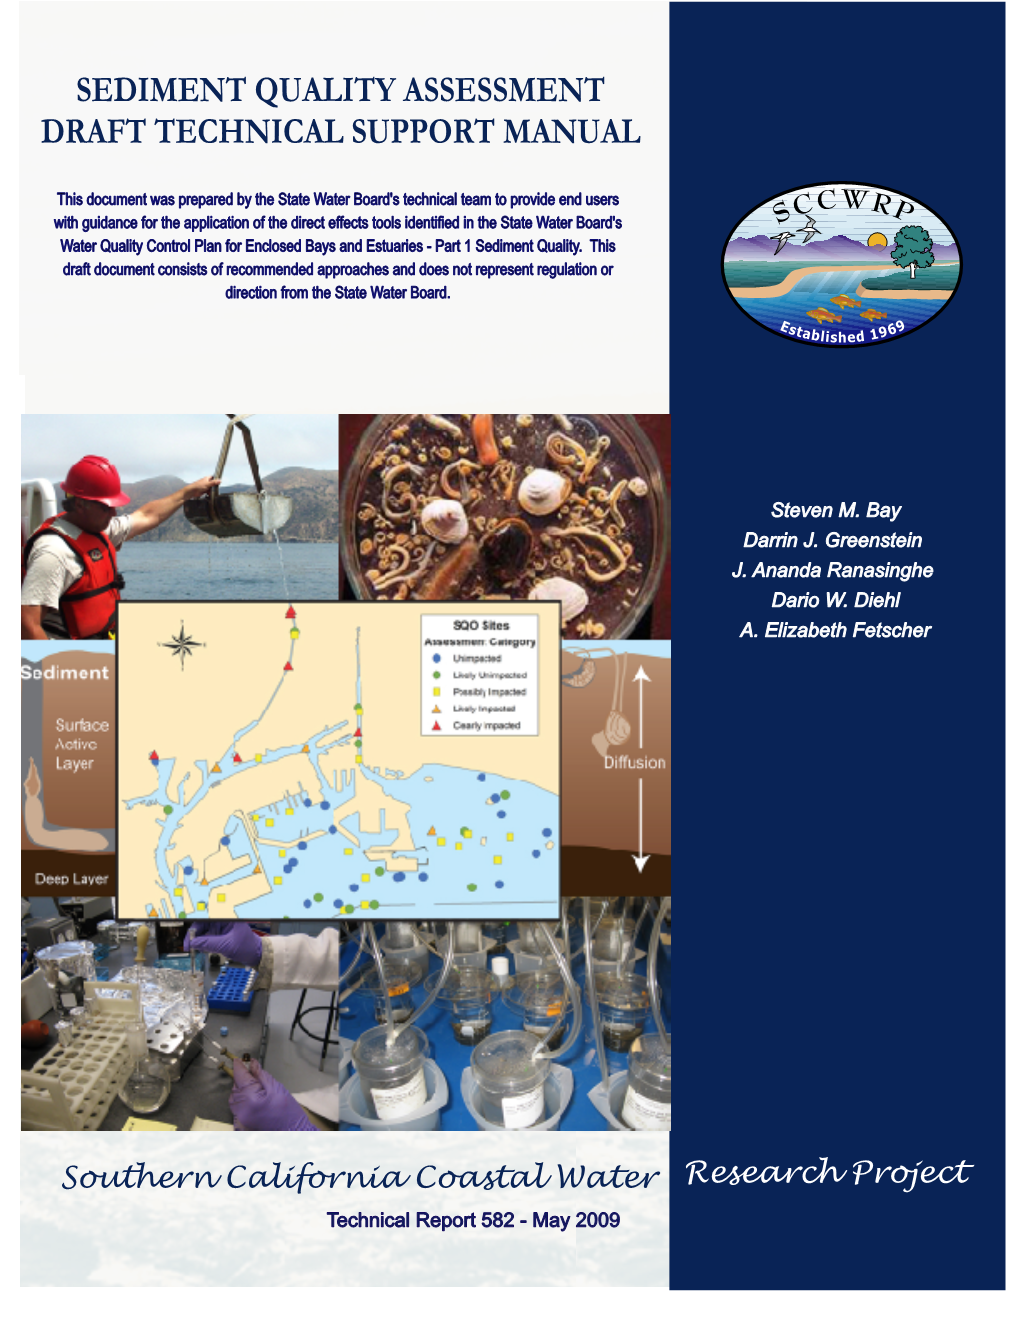 Sediment Quality Assessment Draft Technical Support Manual